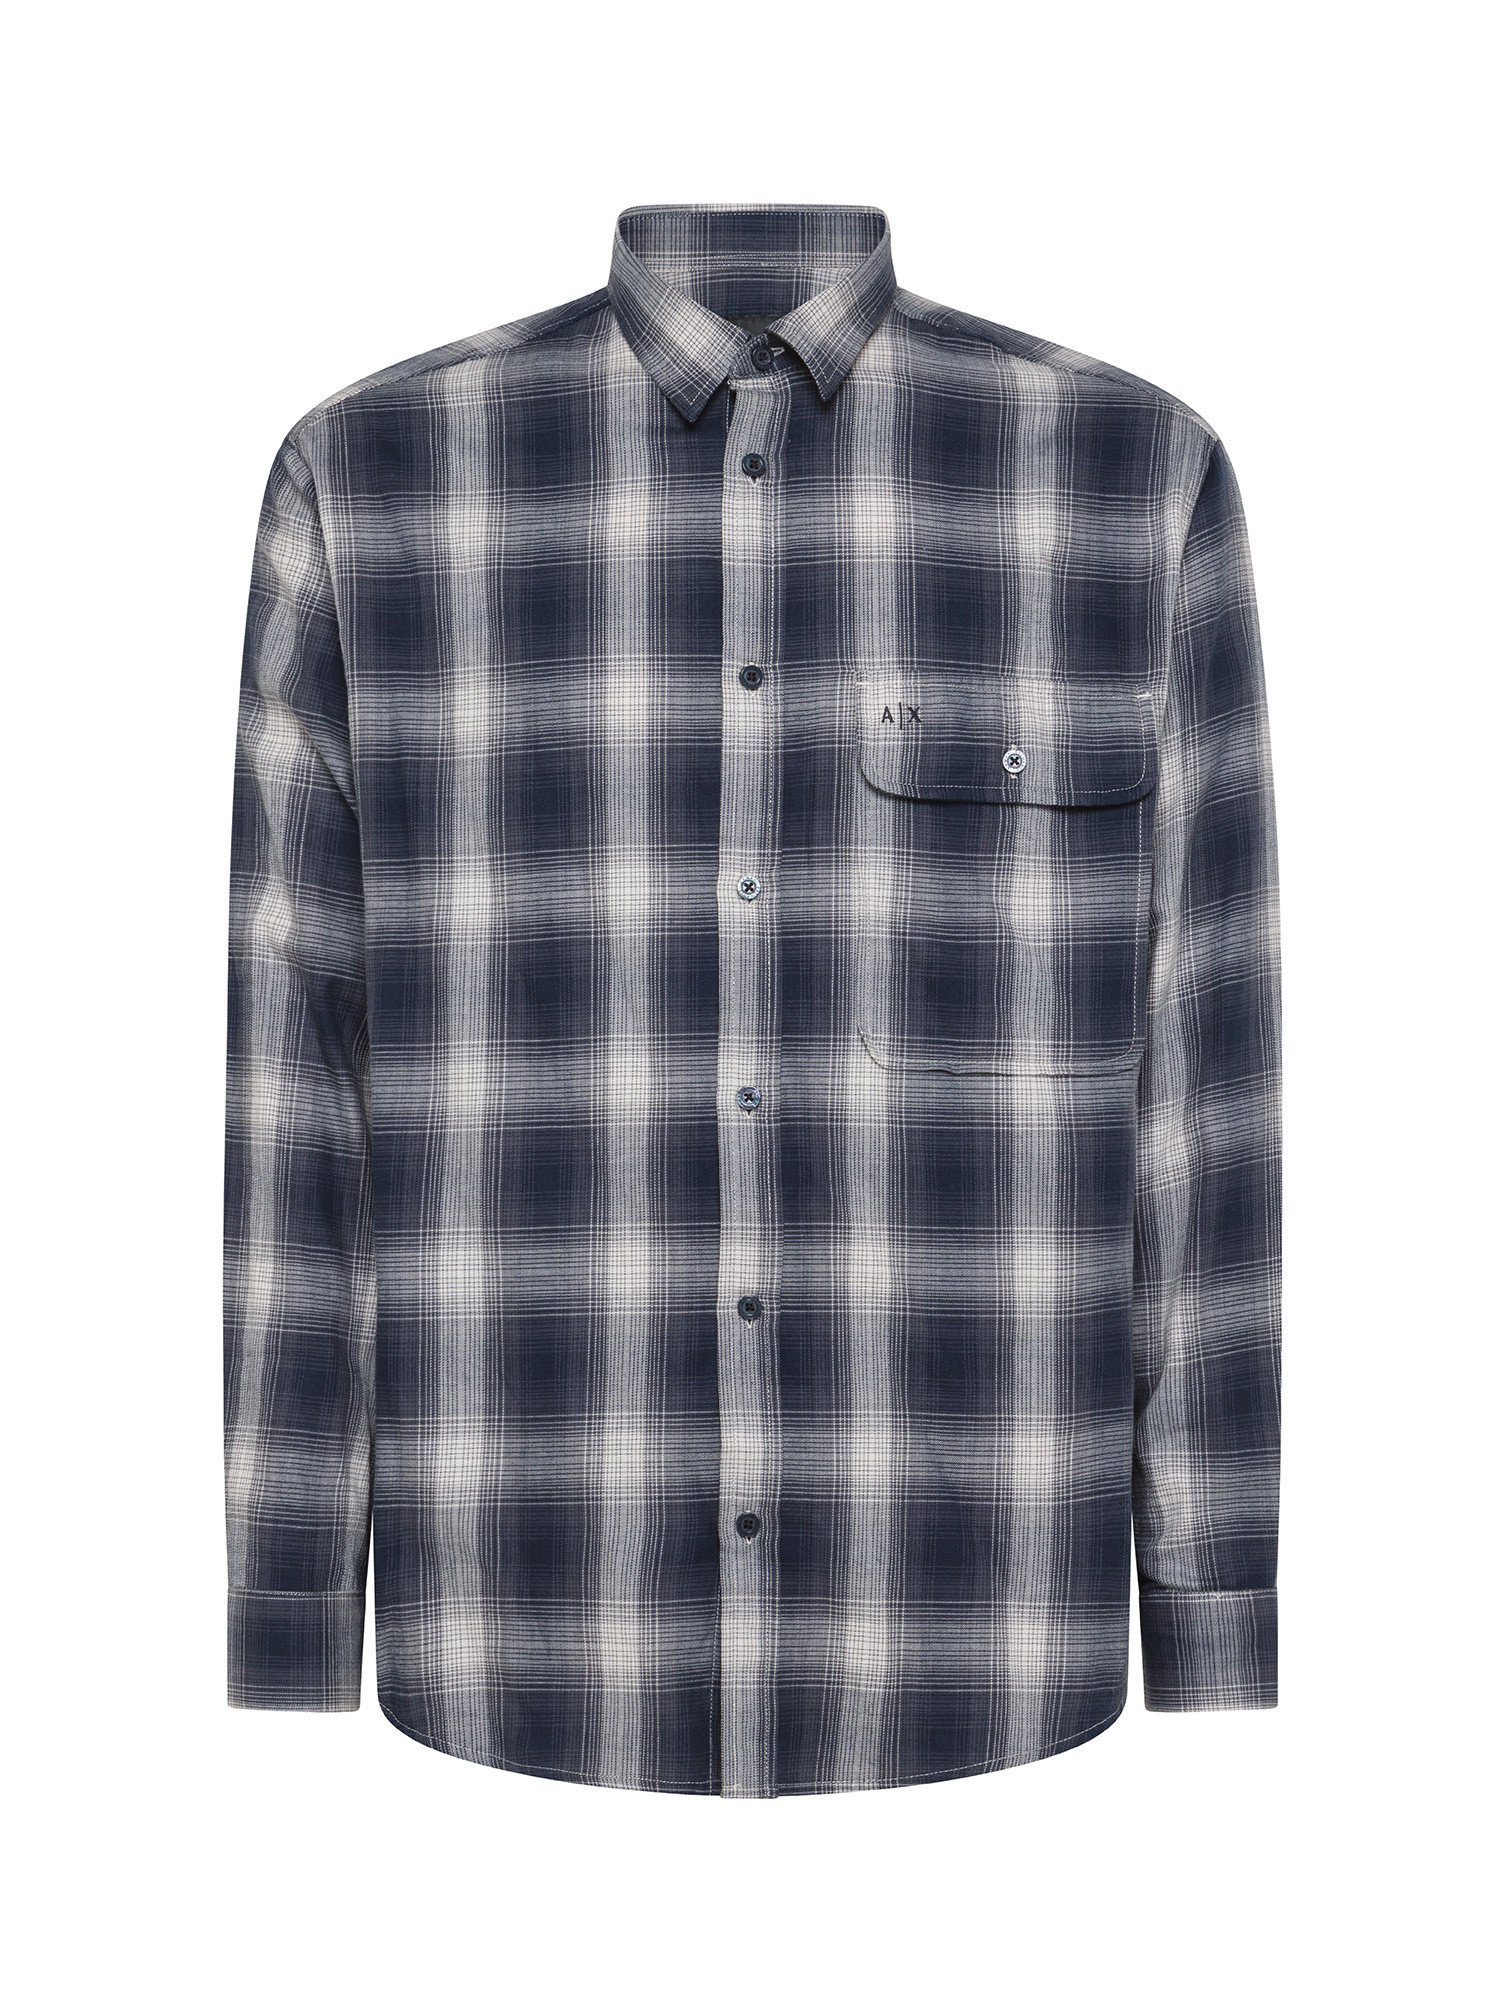 Armani Exchange - Checked shirt in cotton flannel, Dark Blue, large image number 0